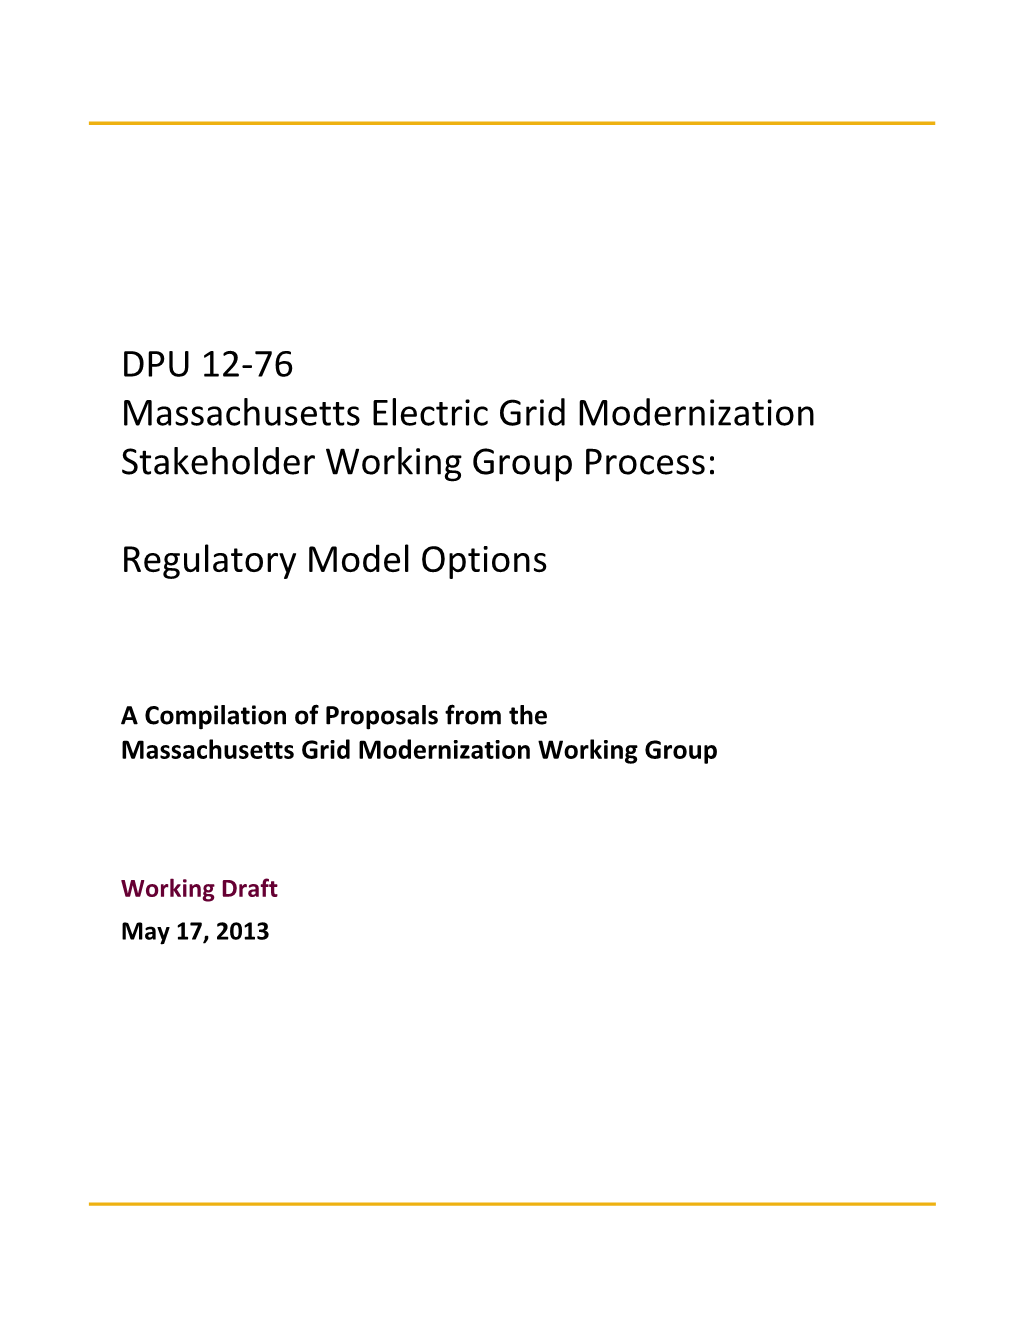 A Compilation of Proposals from the Massachusetts Grid Modernization Working Group